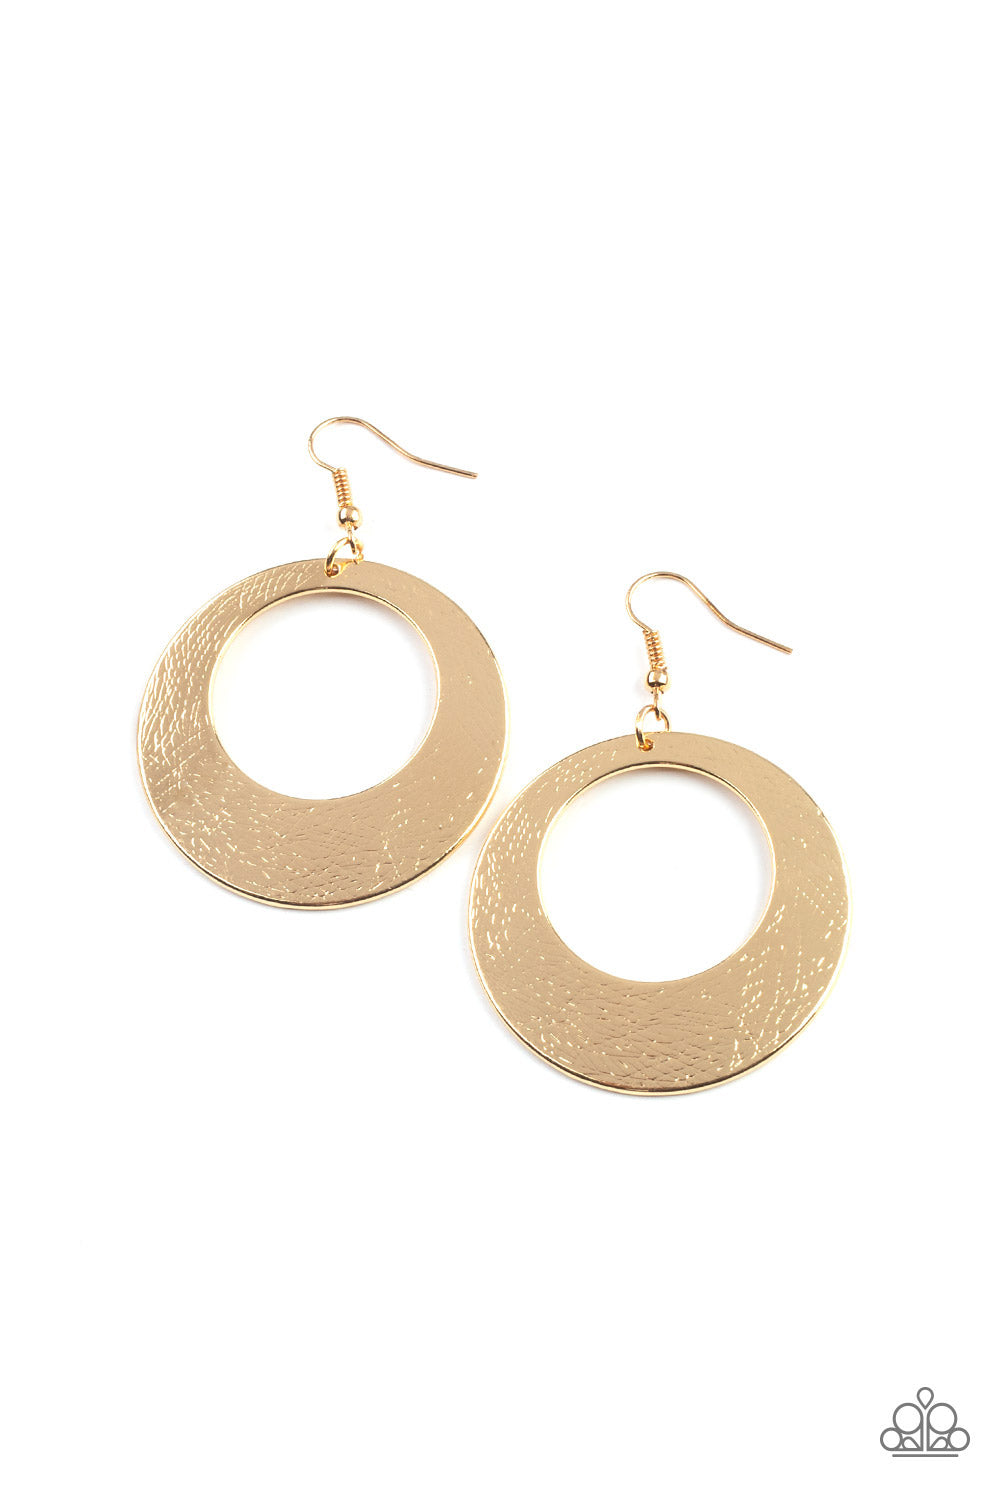 shop-sassy-affordable- gold-earring-19-440321-paparazzi-accessories